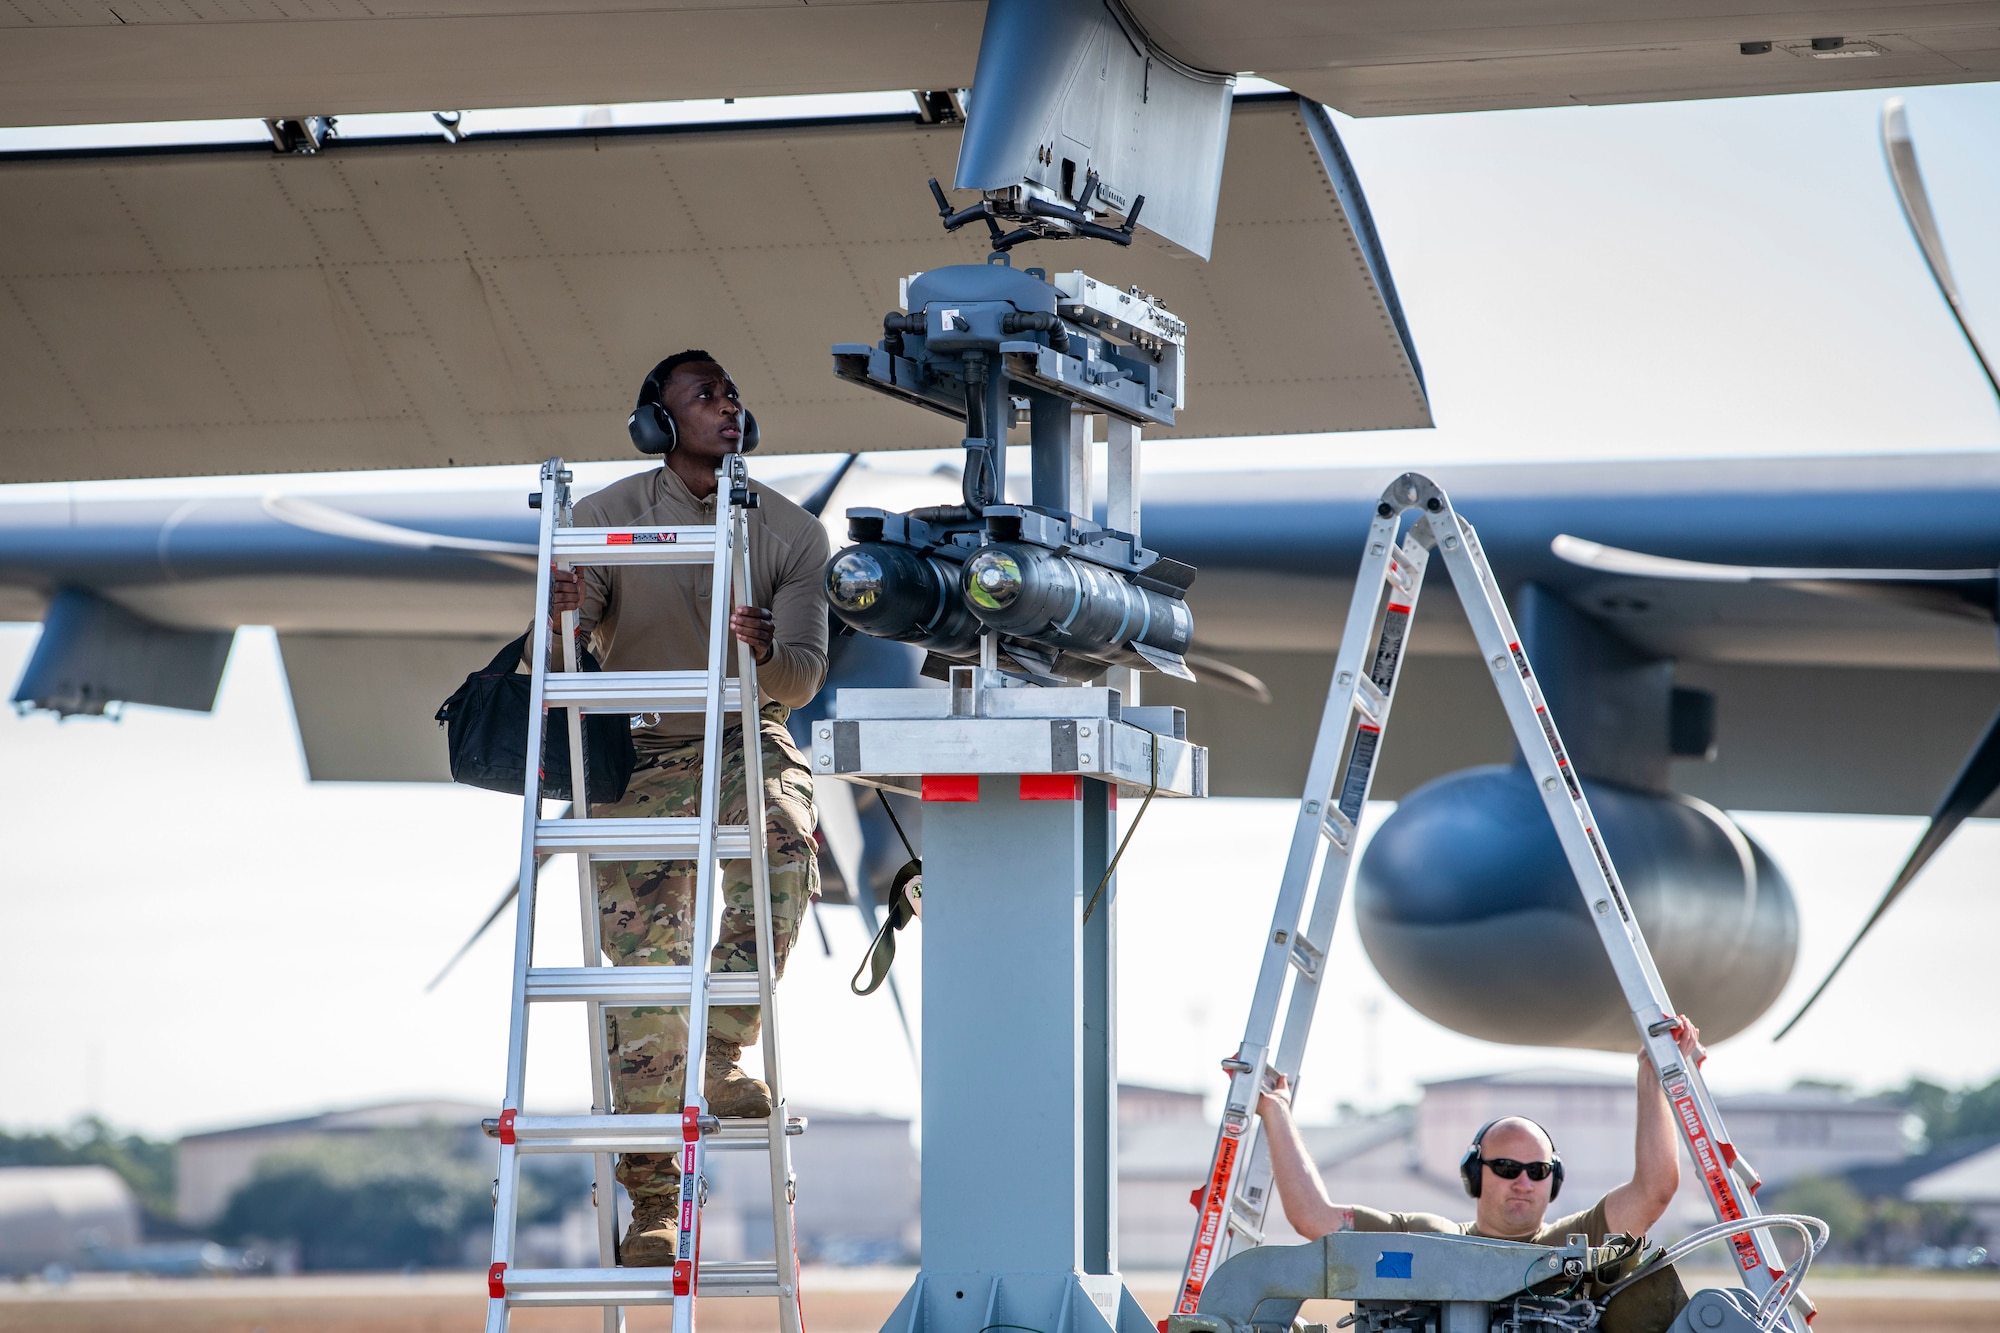 U.S. Air Force Senior Airman Jordan Jones, a 4th Aircraft Maintenance Unit load crew member, helps load two AGM-114 Hellfire missiles onto an AC-130J Ghostrider gunship during the 2022 Weapons Load Crew of the Year Competition, Jan. 31, 2022, at Hurlburt Field, Florida.